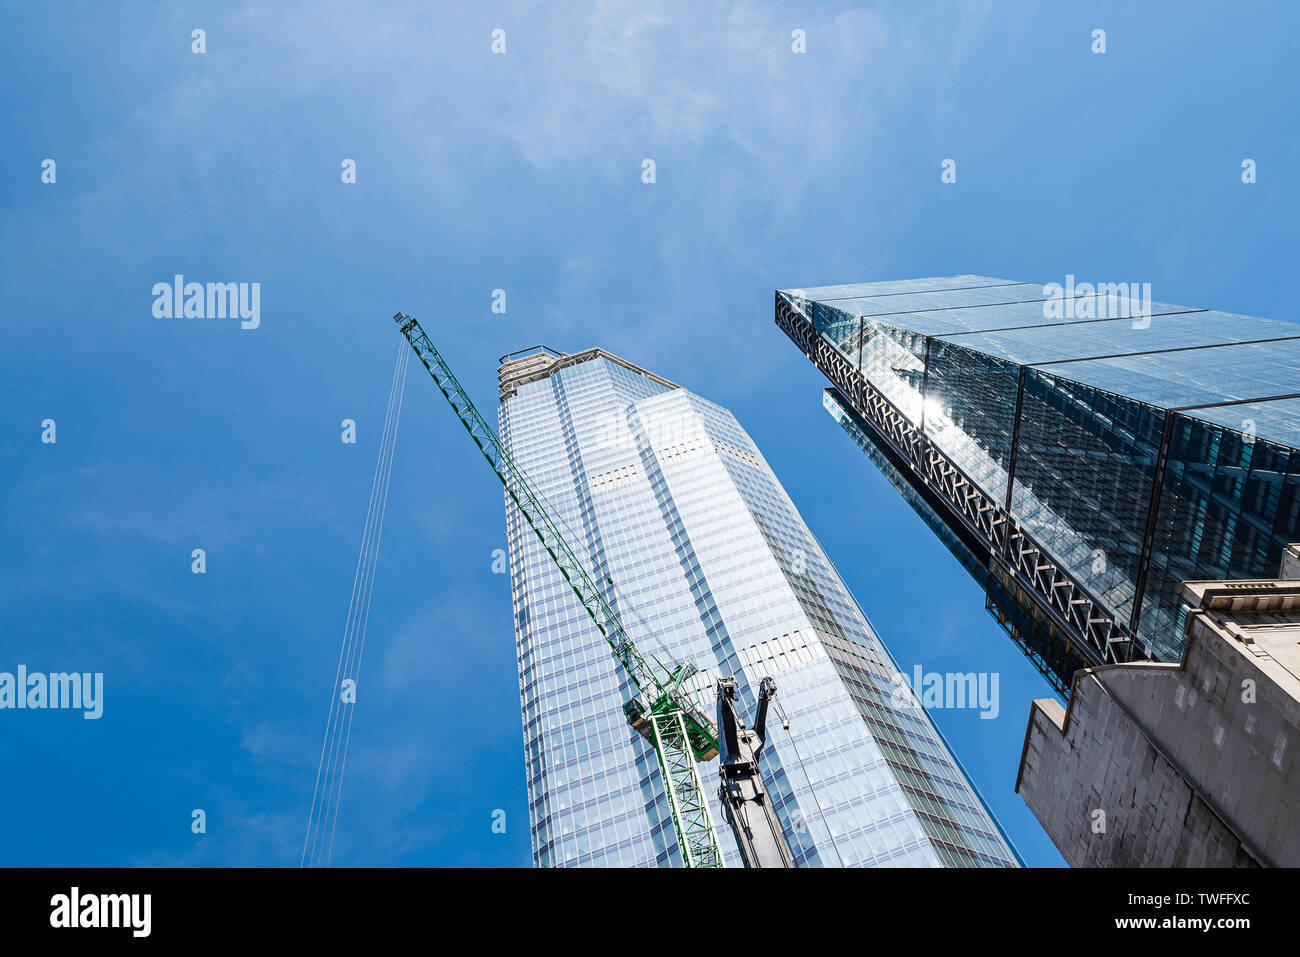 London, UK - May 14, 2019: Low angle view of skyscraper with cranes under construction in the City of London against blue sky with space for copy Stock Photo